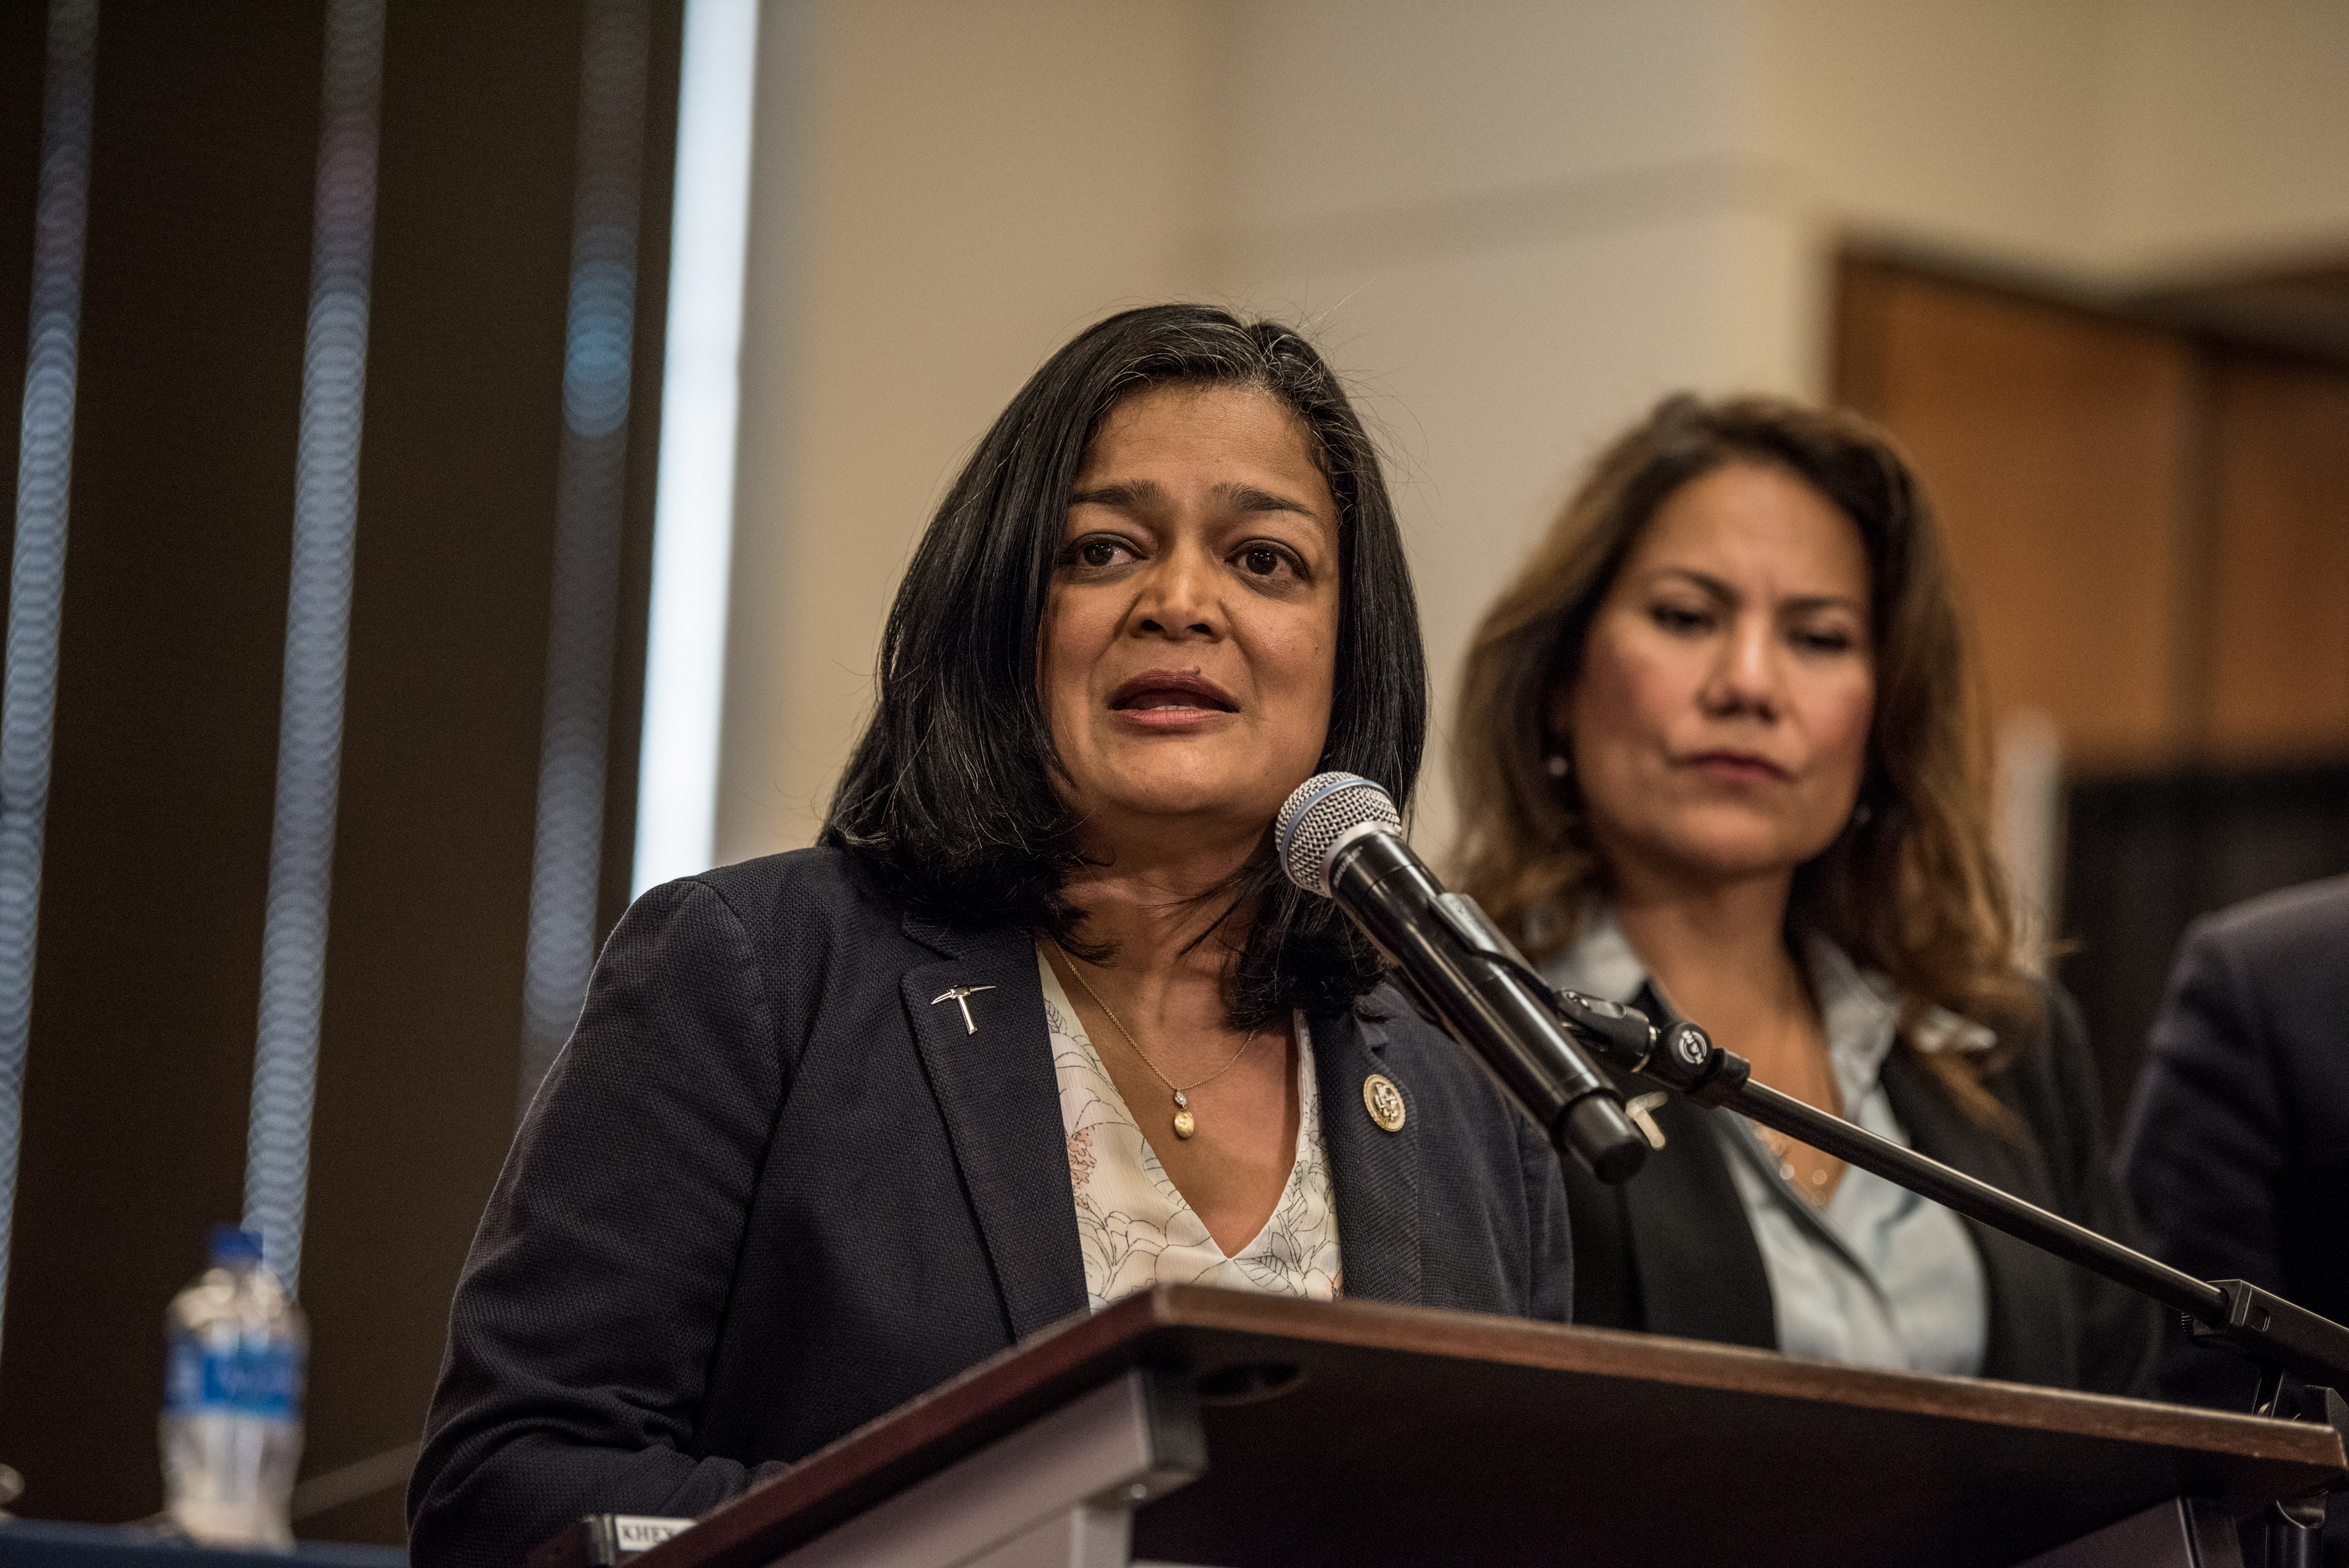 EL PASO, TX - SEPTEMBER 06: Rep. Pramila Jayapal (D-WA) speaks during a press conference held by the House Judiciary Committee on immigration and domestic terrorism at the University of Texas at El Paso on September 6, 2019 in El Paso, Texas. (Cengiz Yar/Getty Images)